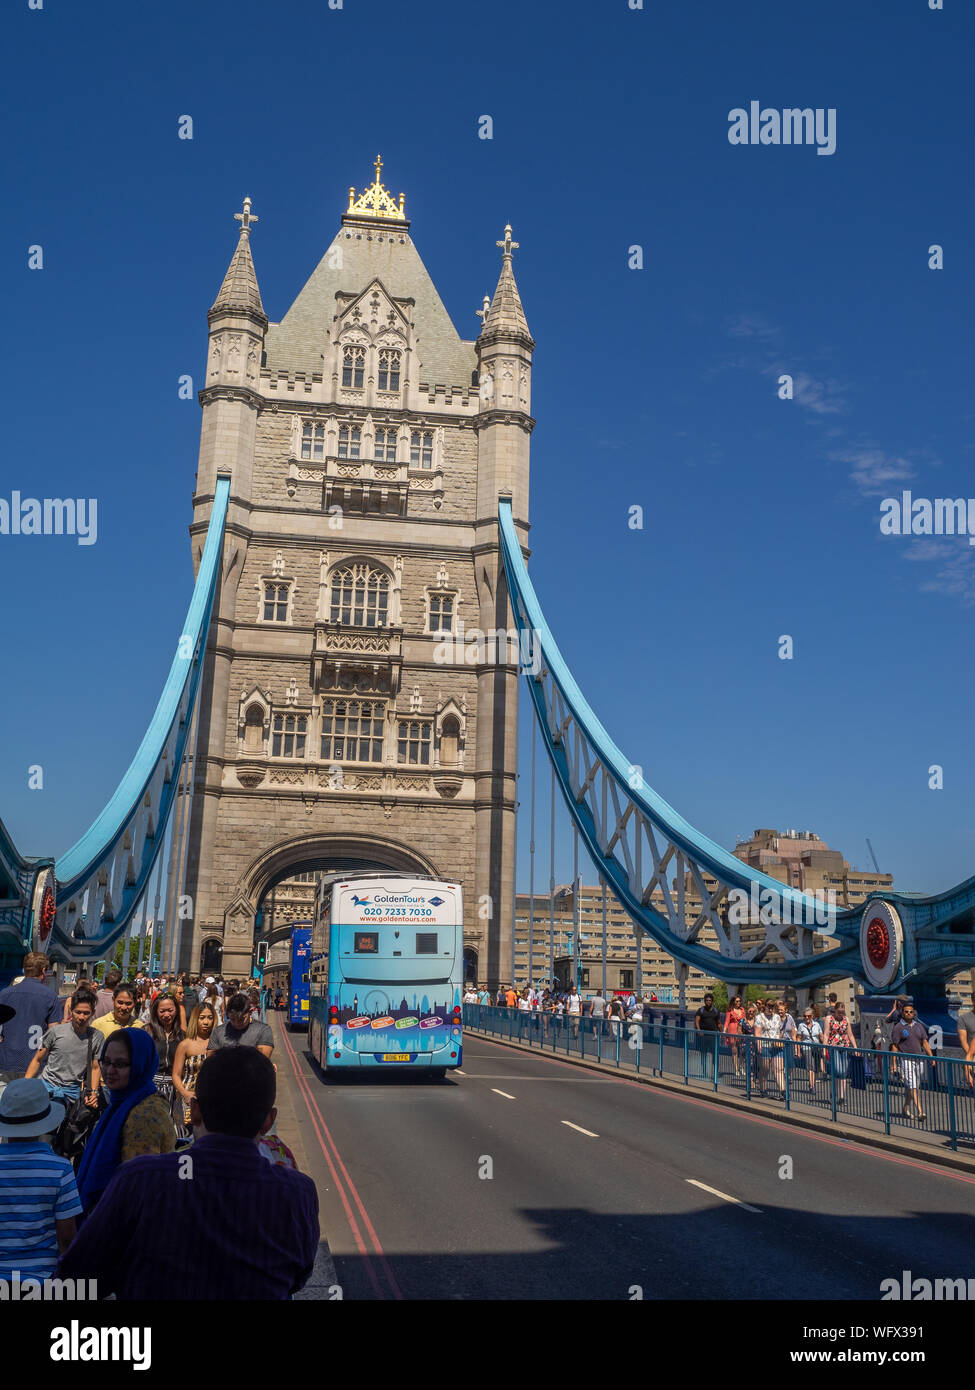 London, England - August 5, 2018: London's famous Tower Bridge on blue sky summer day. Tower Bridge is one of London's most famous tourist attractions Stock Photo